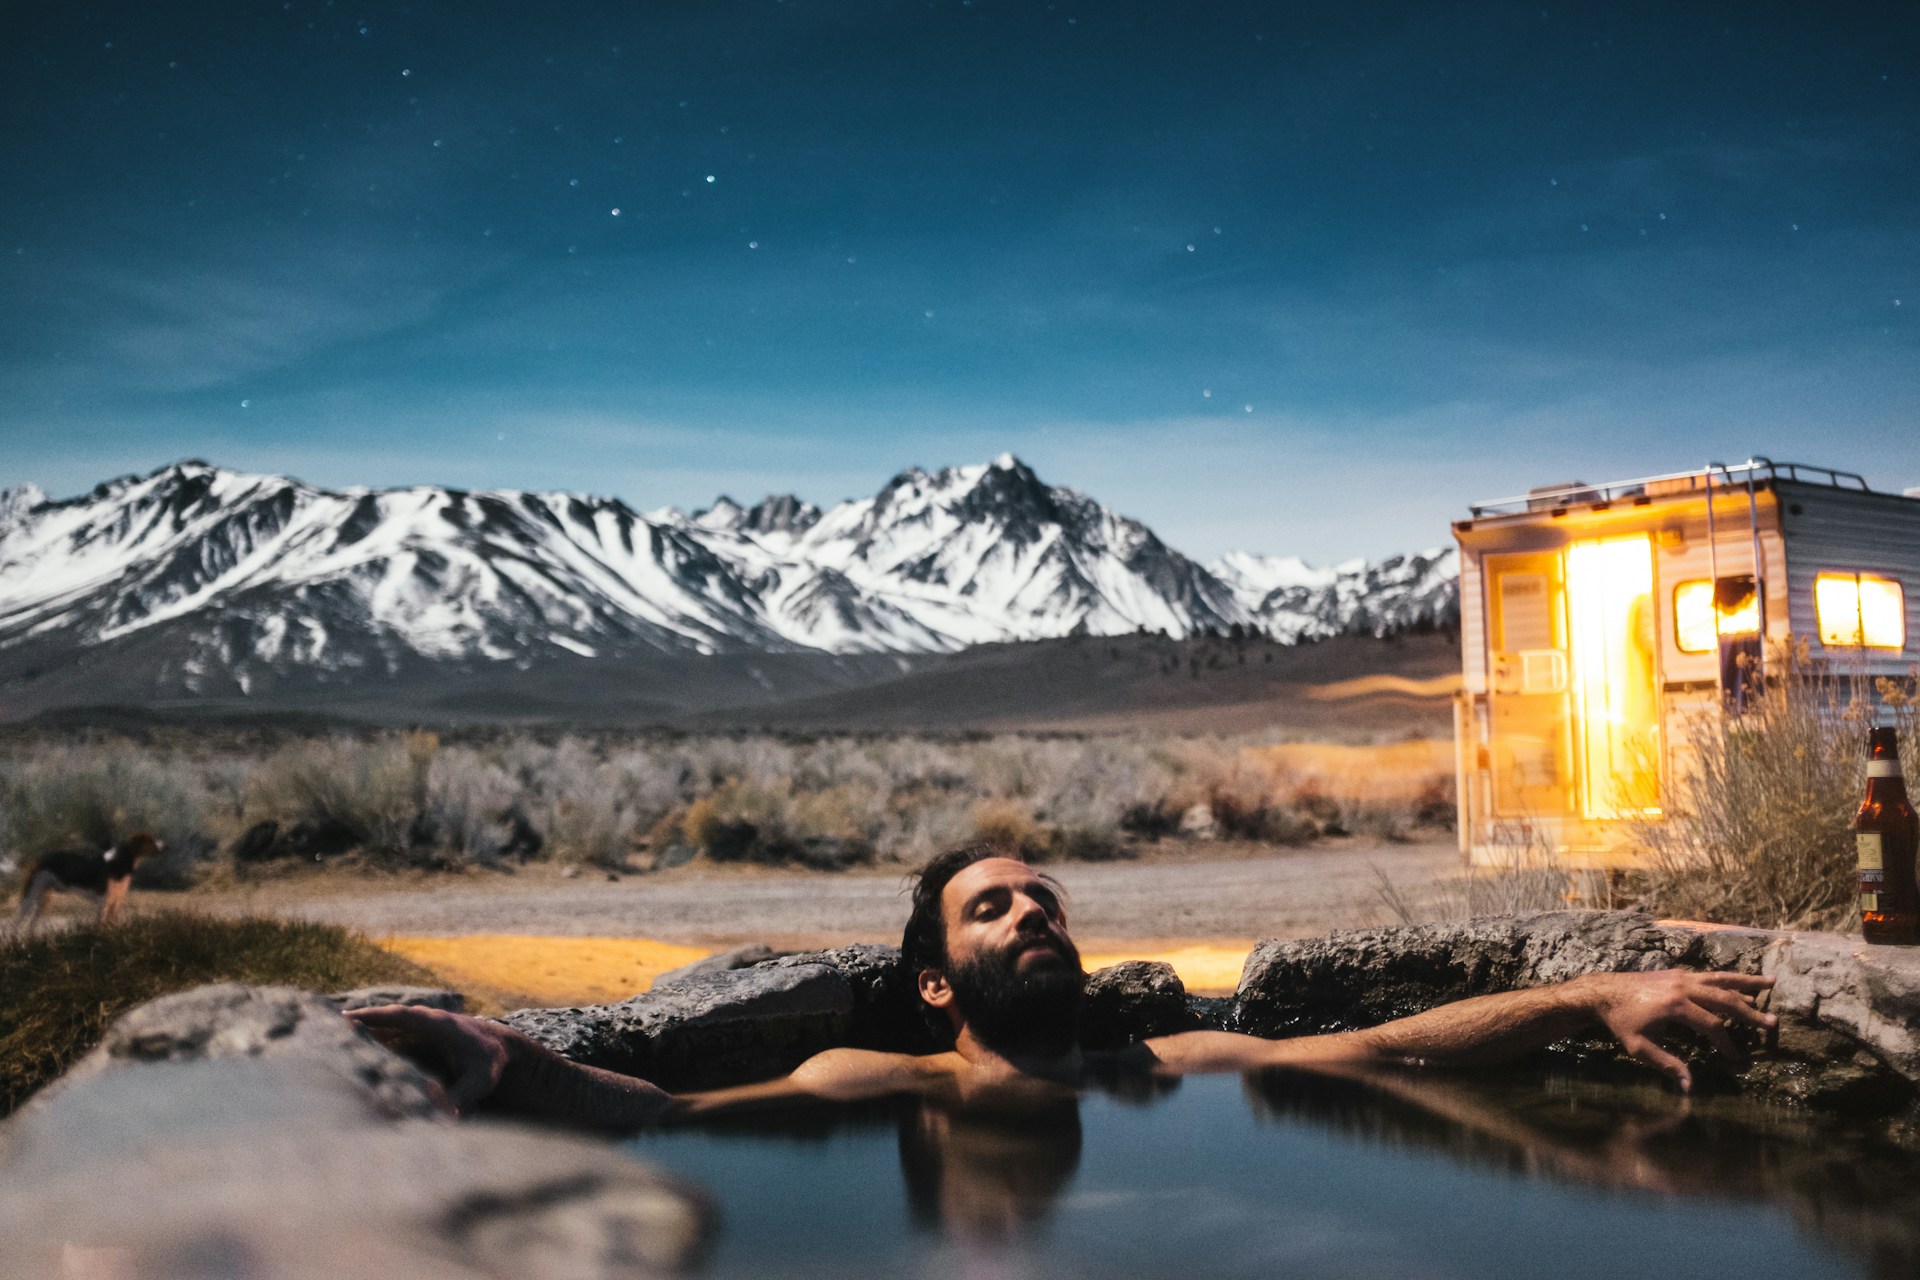 A man soaking in a natural tub outside of an RV during dusk with a mountain range behind him.